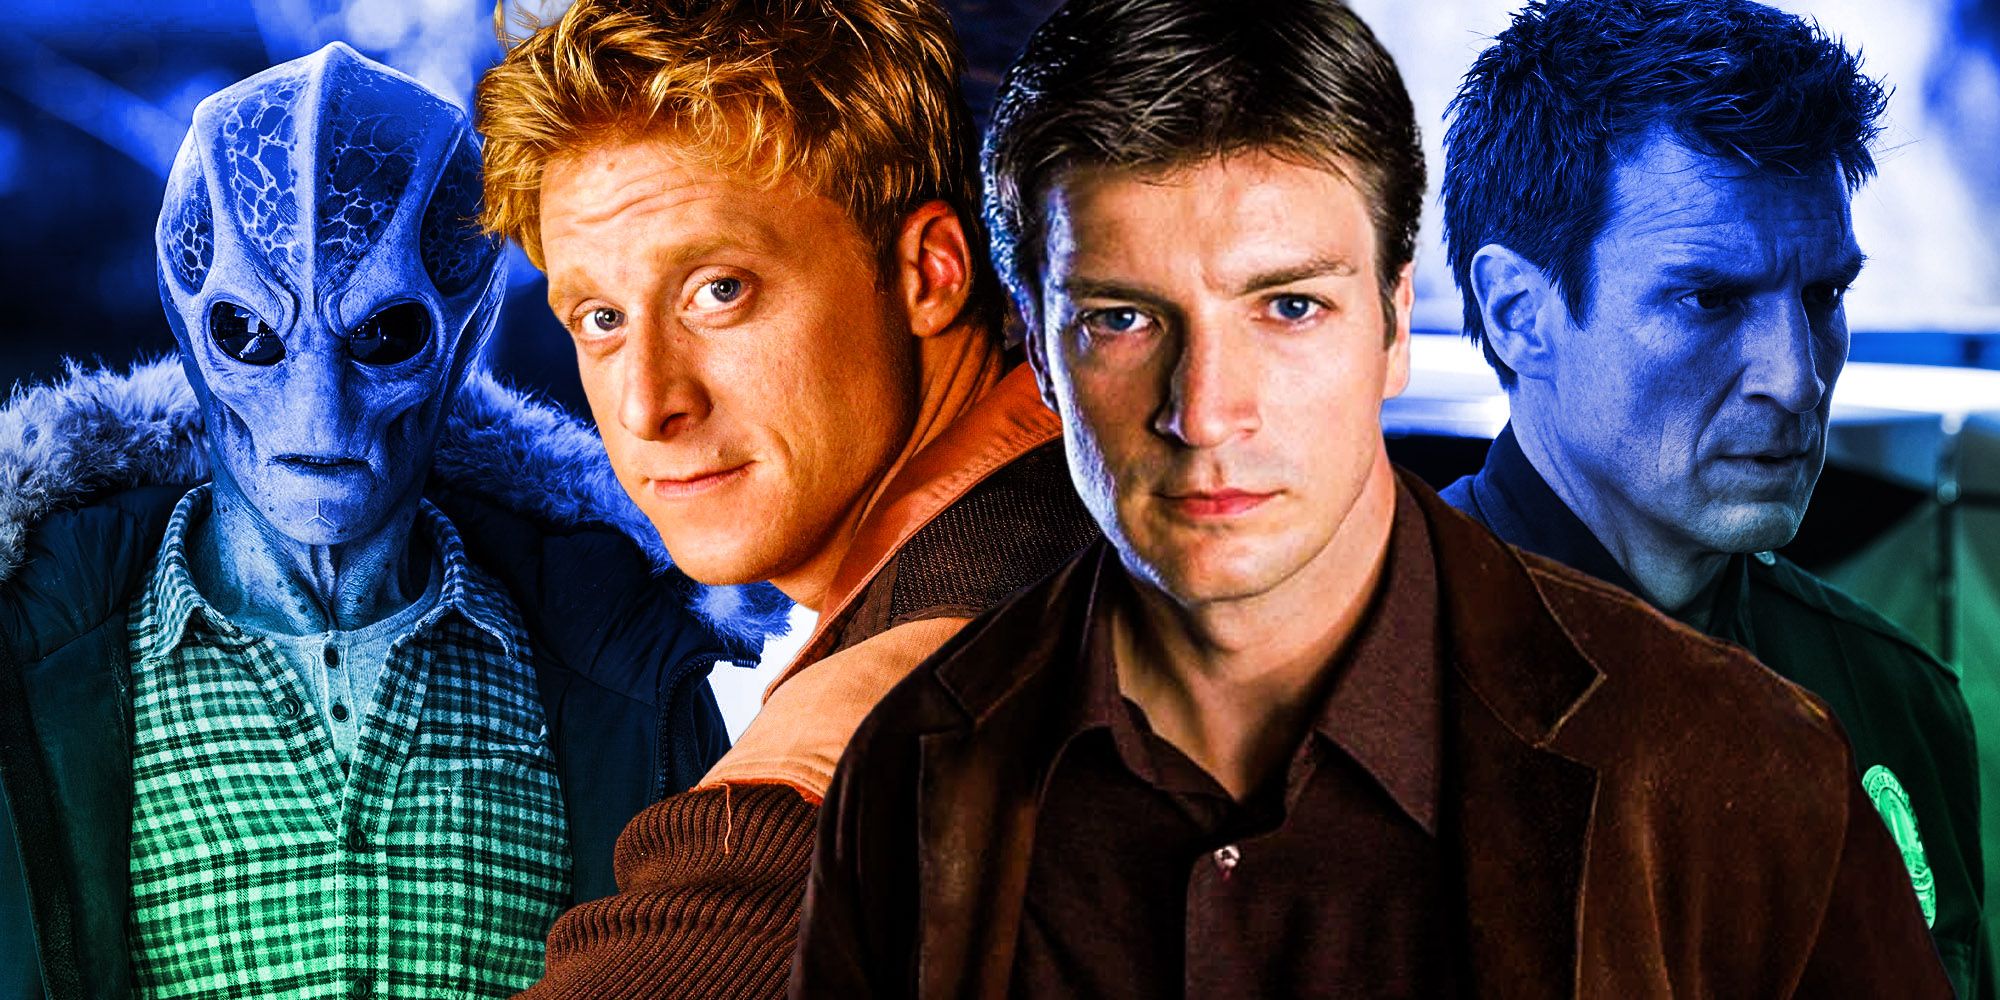 Firefly What Each Lead Actor Has Done Since The Series Ended